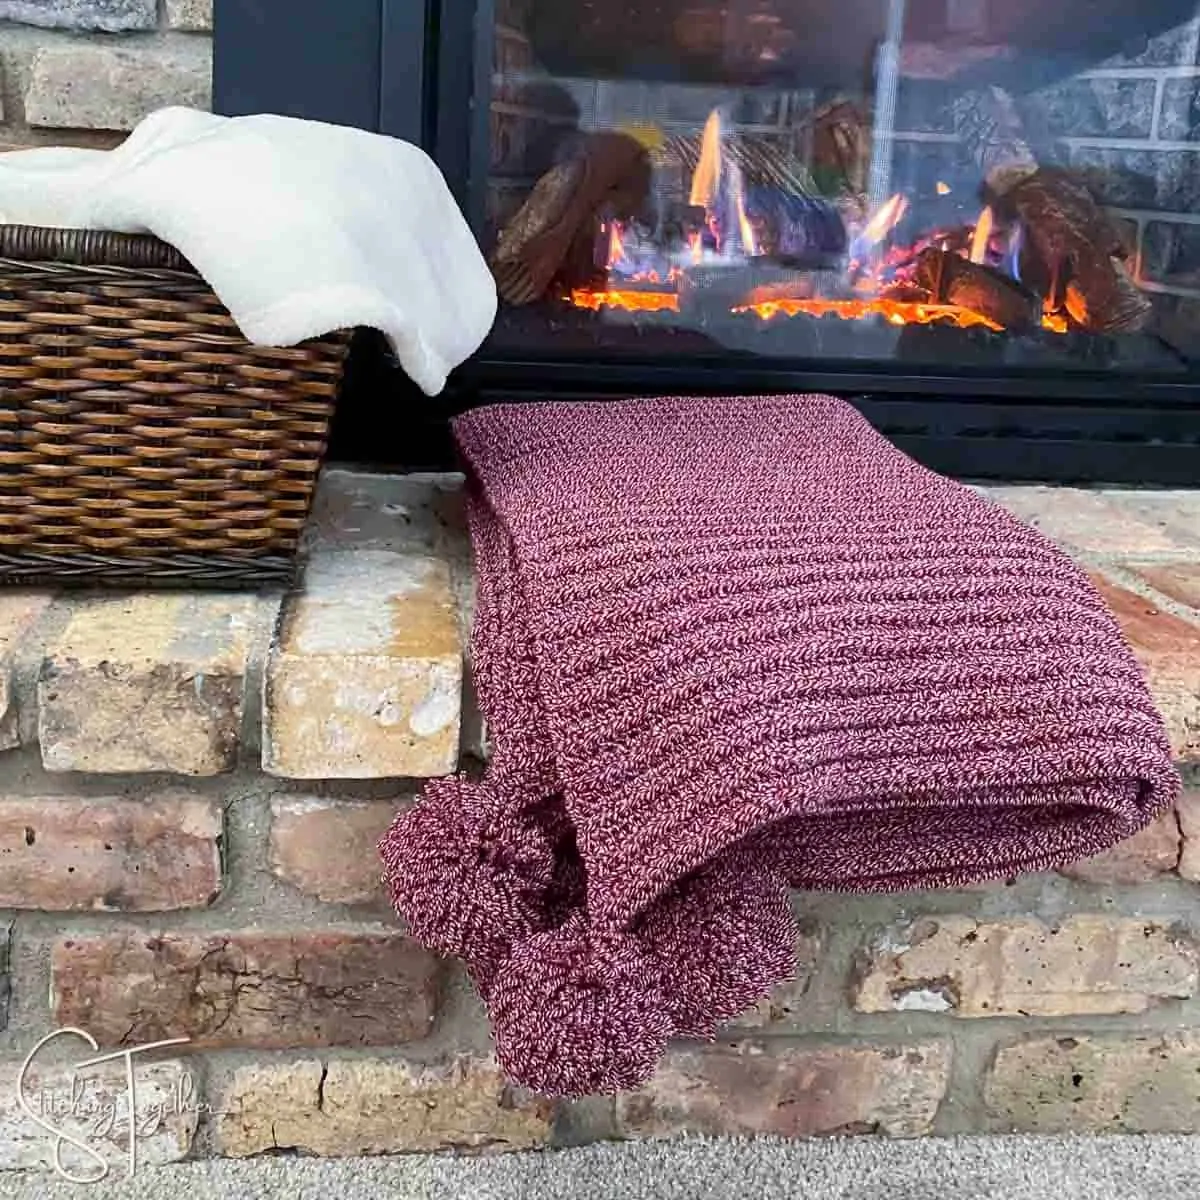 red crochet blanket with pom poms folded on the hearth of a fireplace